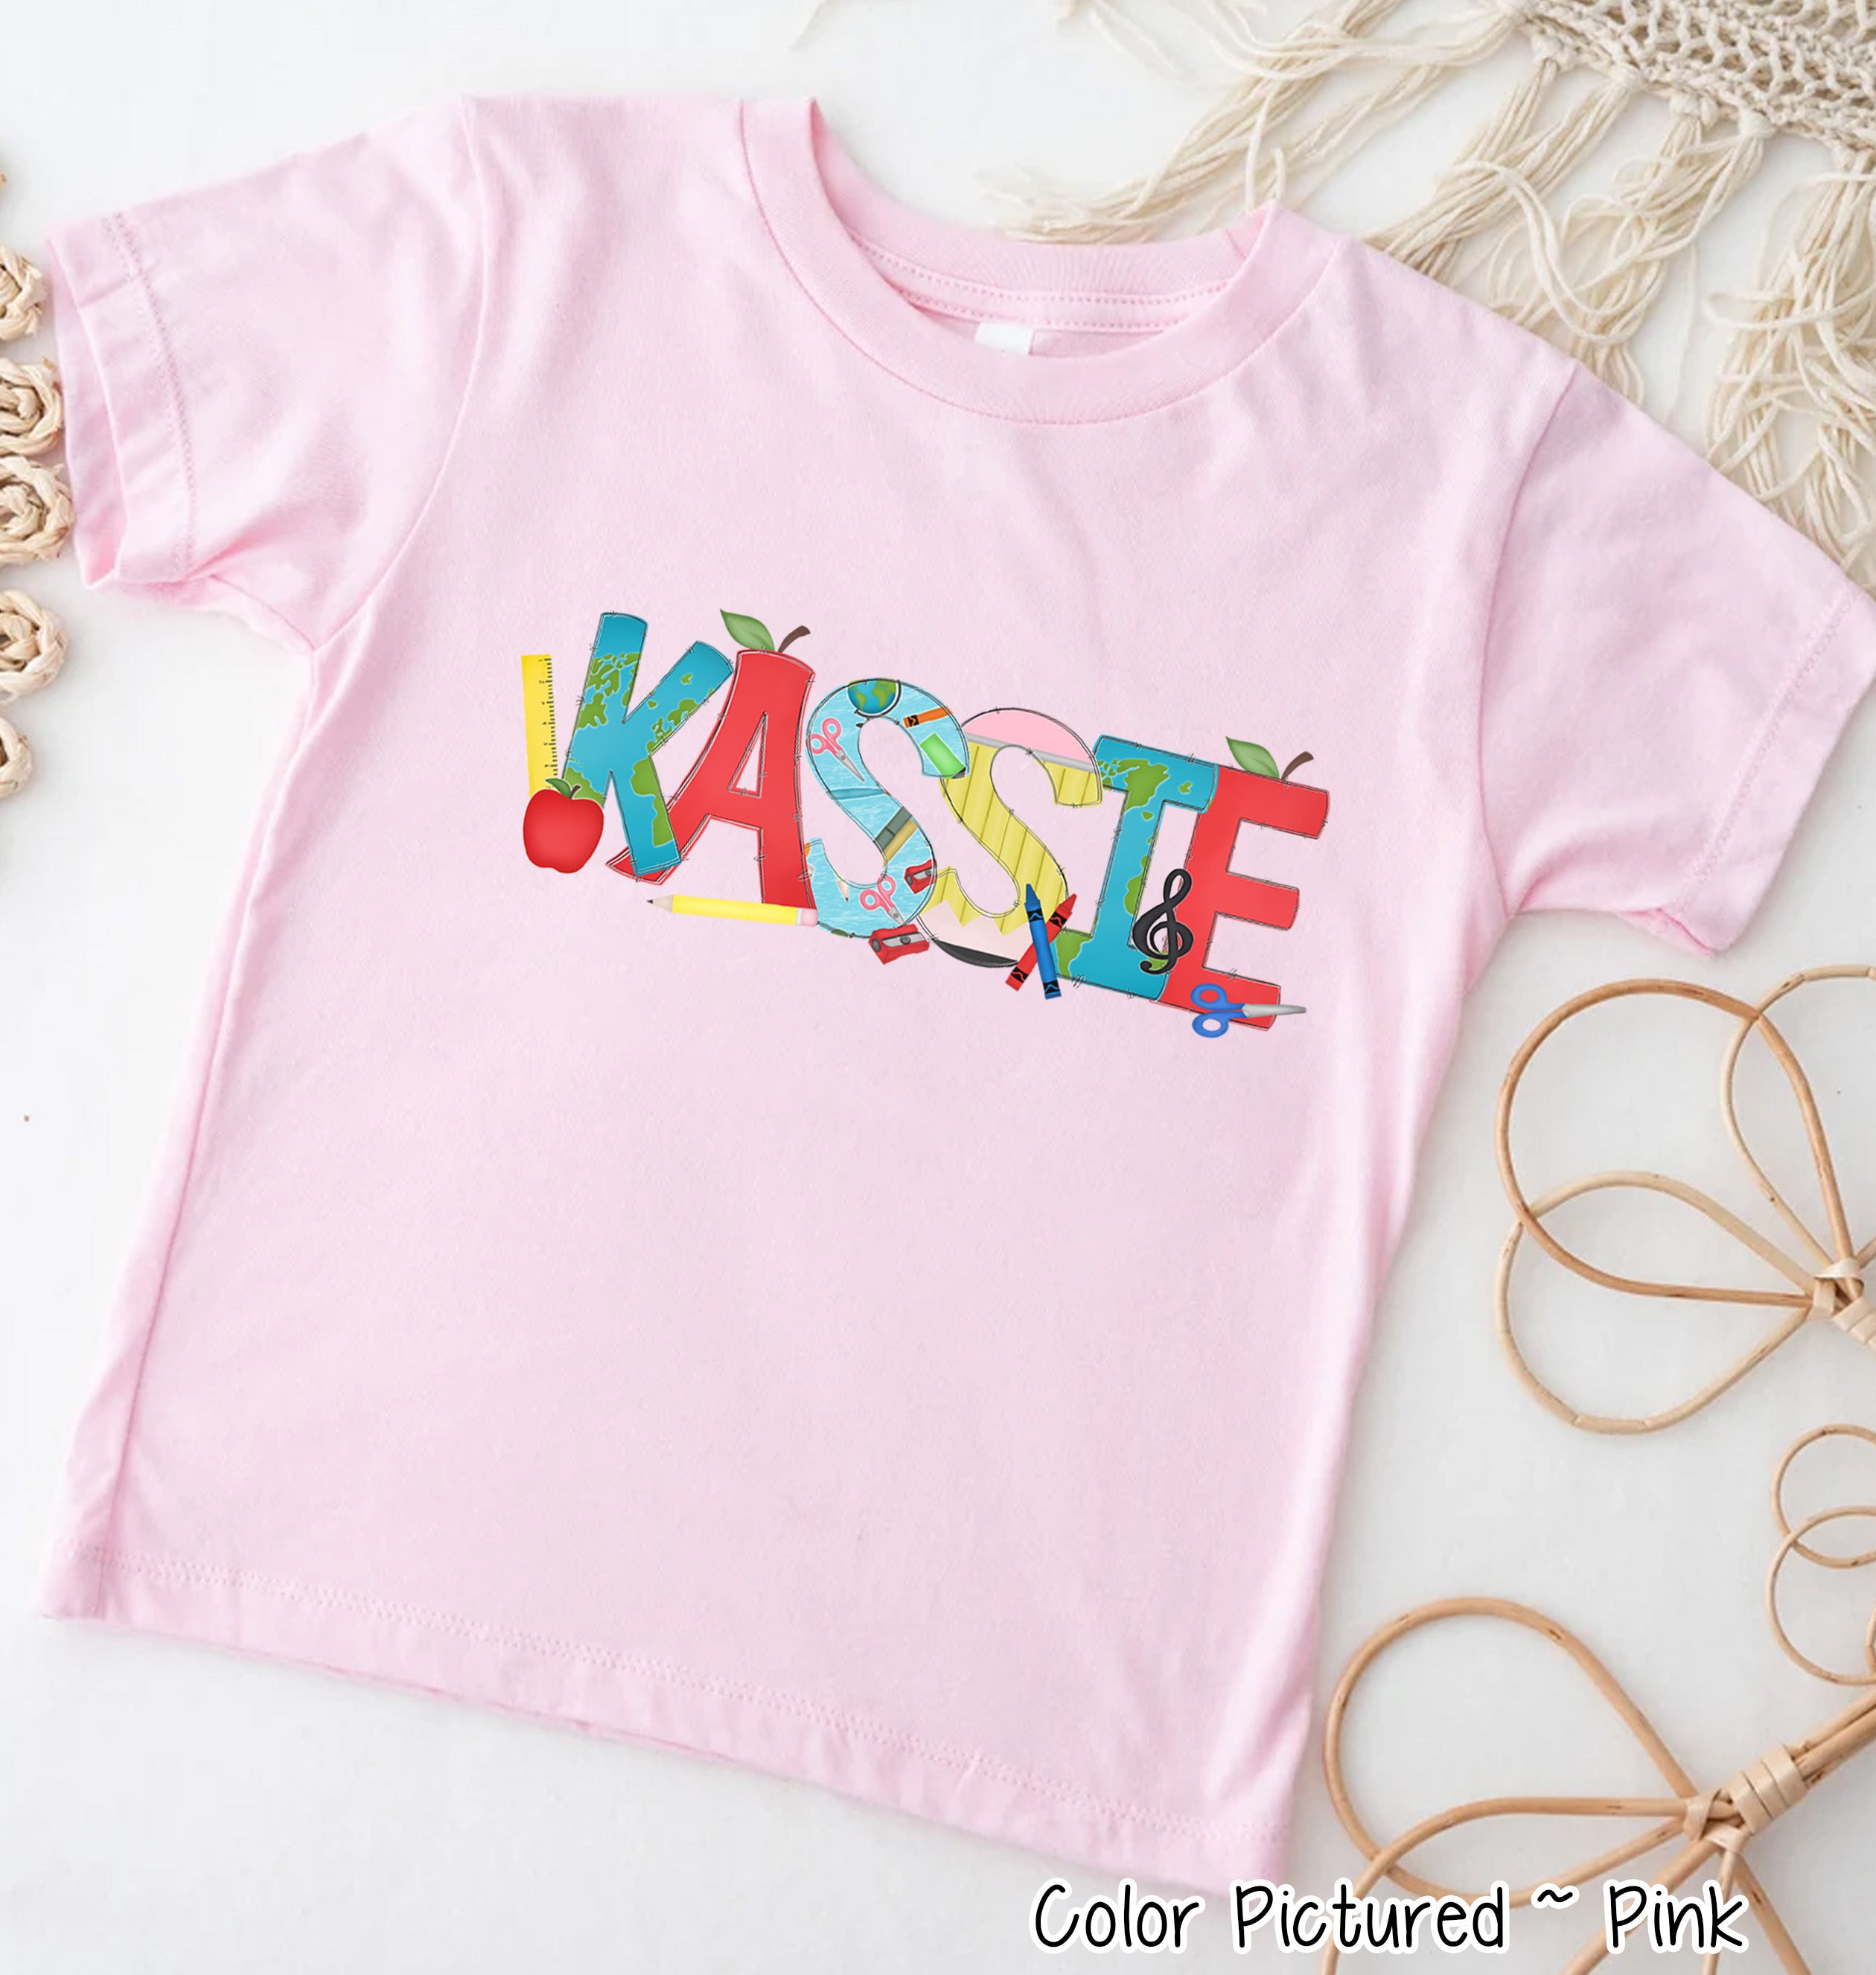 Personalized Doodle School Supplies Name Tee